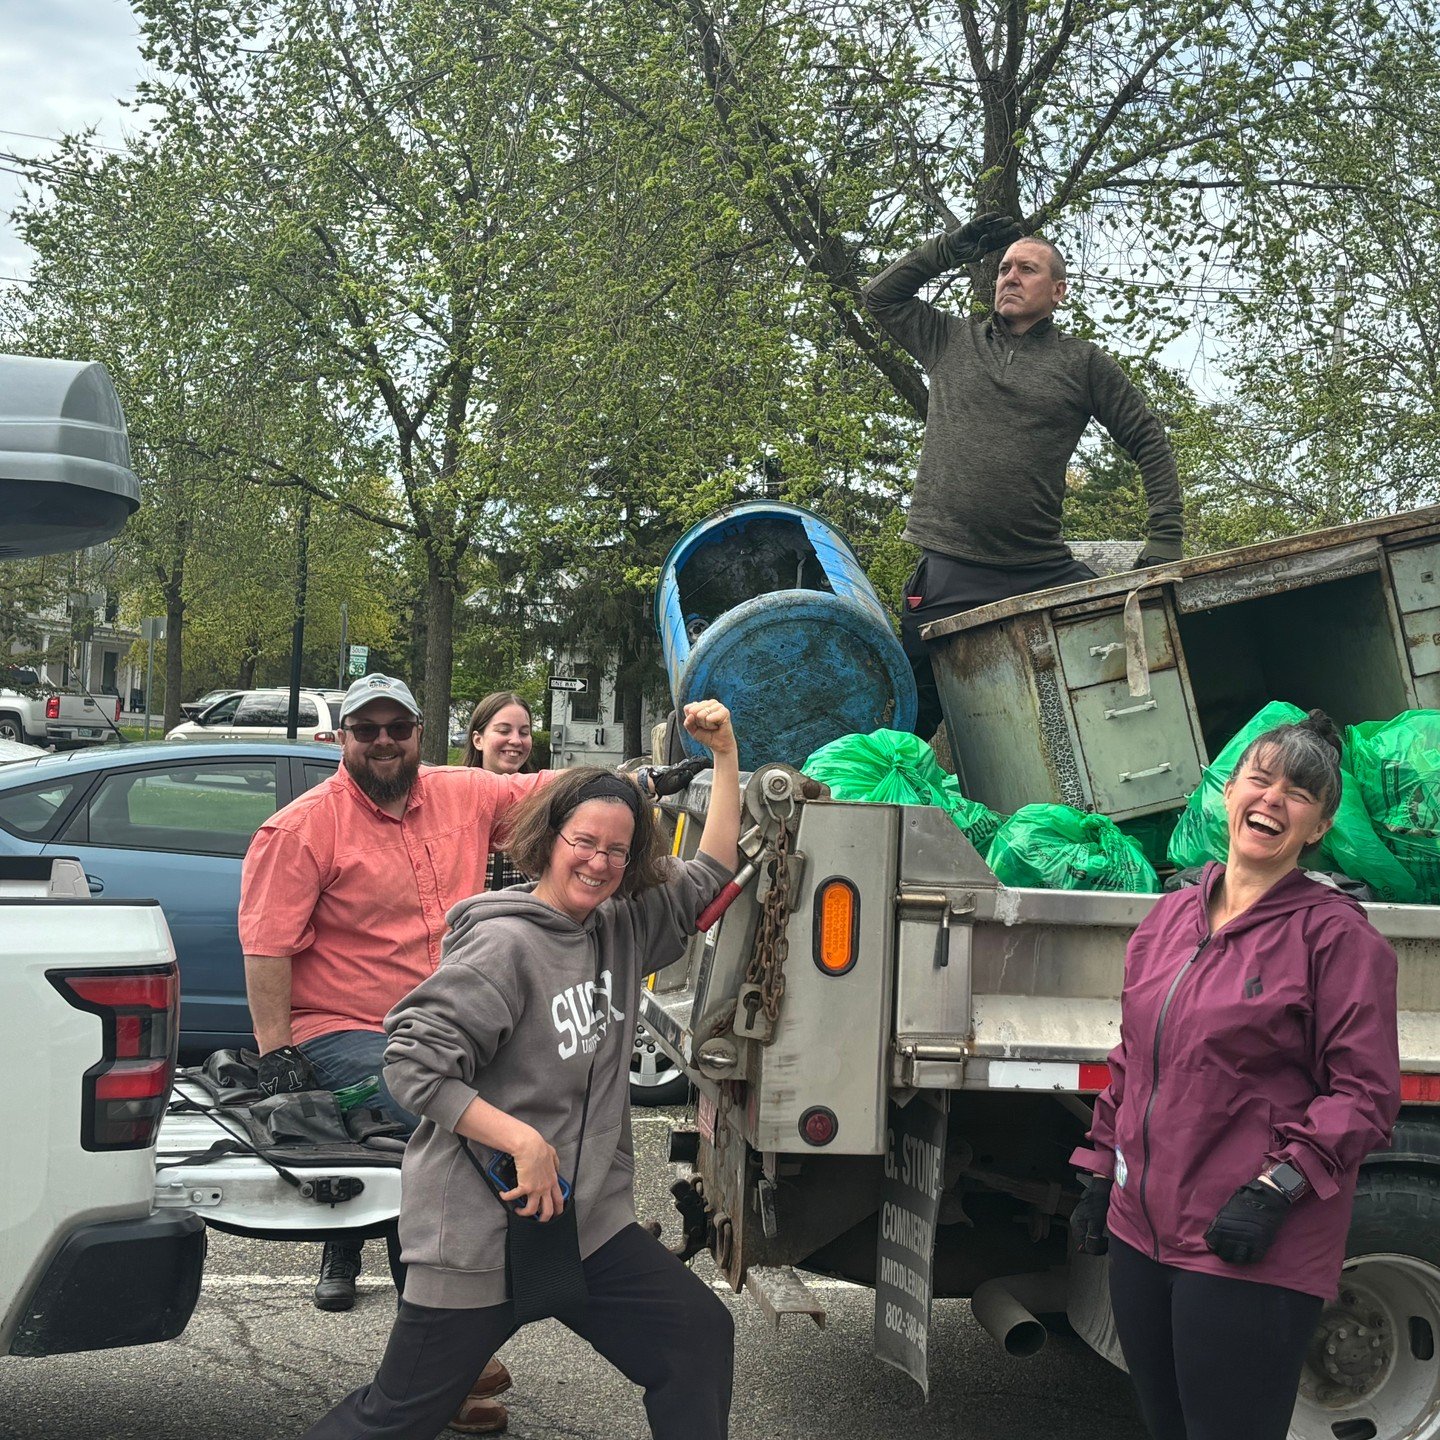 Thank you to everyone who participated in Green-Up Day on Saturday! 

It was inspiring to see people from all walks of life come together to clean our town. Some of the most notable finds from Saturday include a desk with leopard print tape on it, se